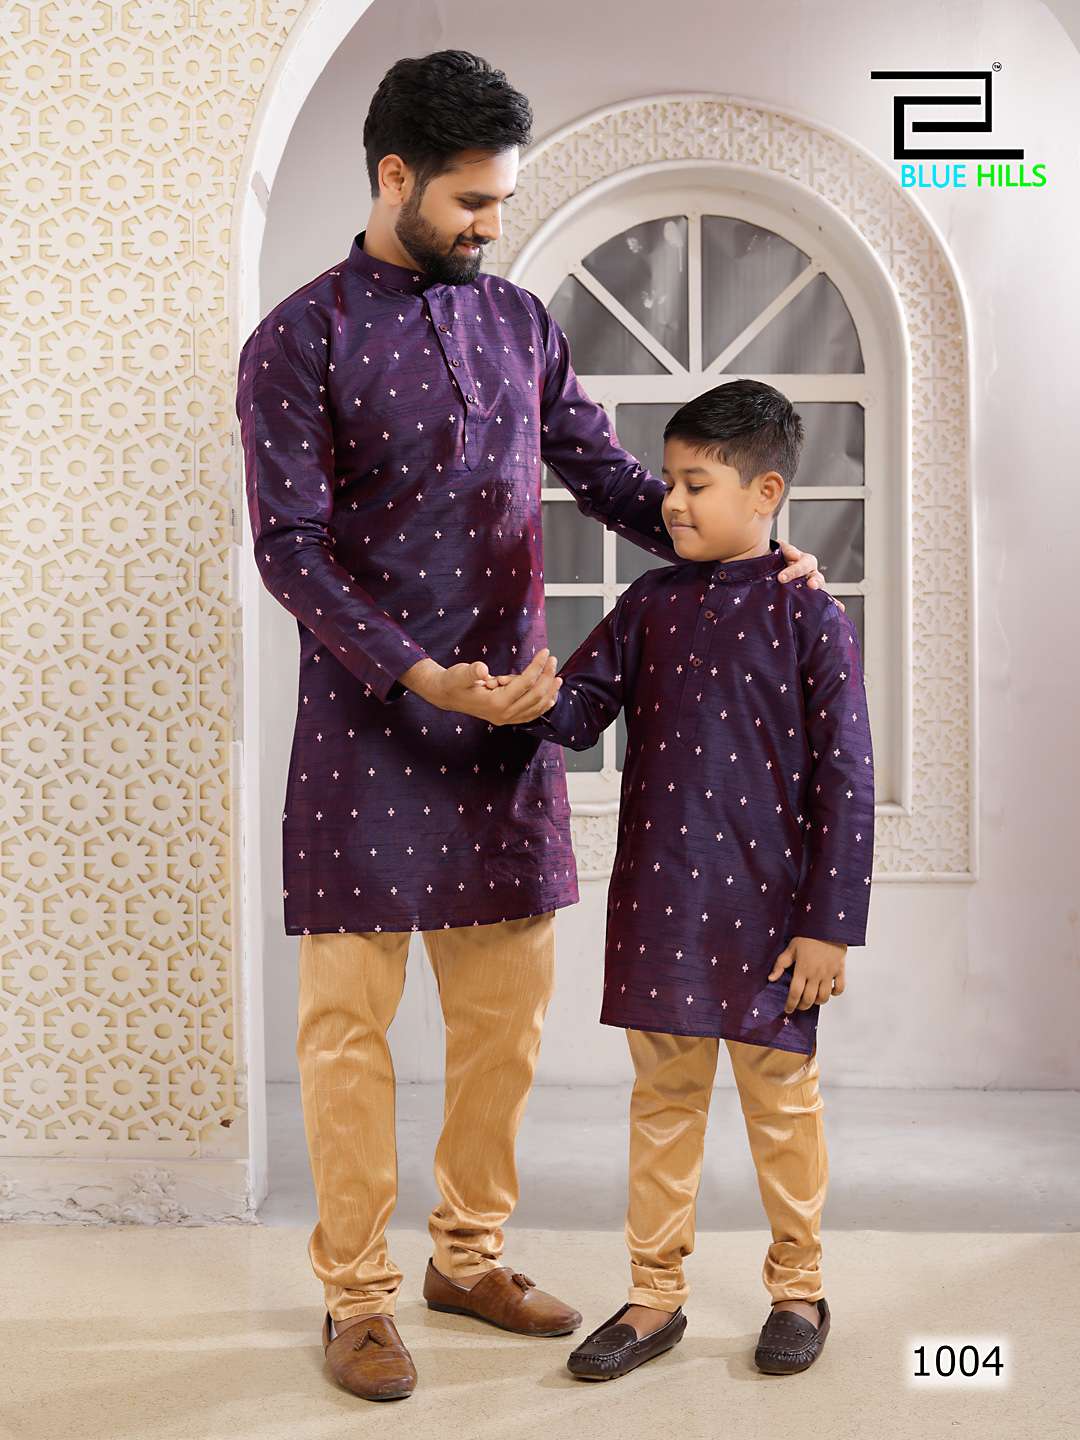 Golden Boys By Blue Hills 1001 To 1005 Series Beautiful Colorful Stylish Fancy Casual Wear & Ethnic Wear & Ready To Wear Silk Jacquard Kurtas At Wholesale Price